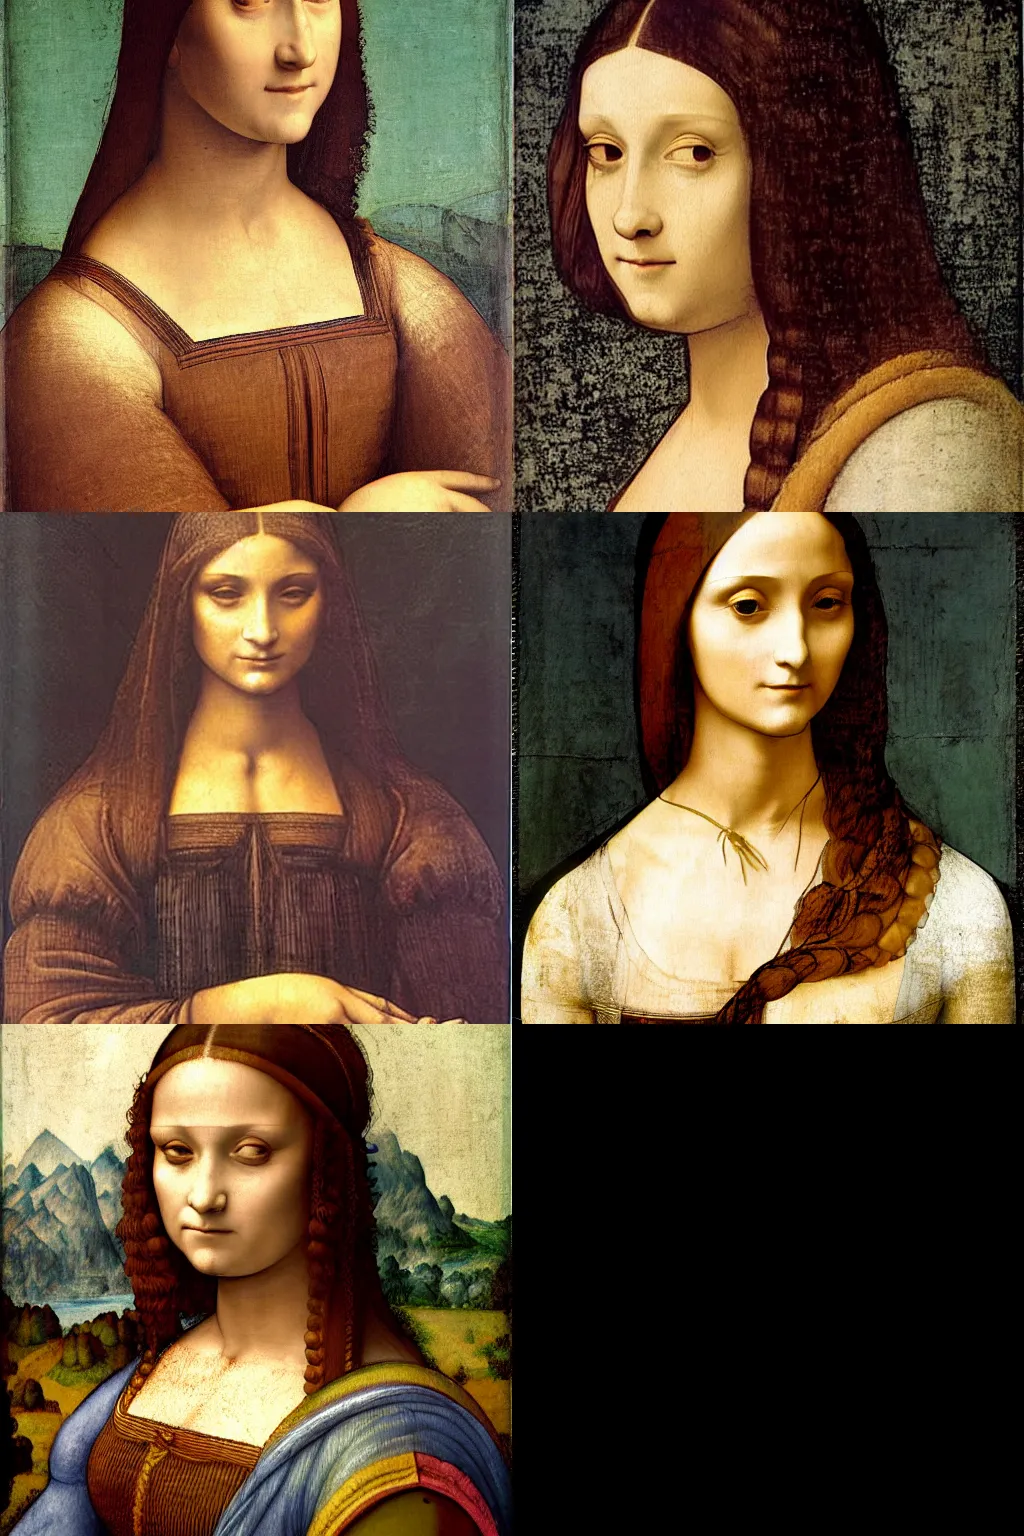 Prompt: an hd painting of a woman by leonardo da vinci. she has straight long dark brown hair, parted in the middle. she has large dark brown eyes, a small refined nose, and thin lips. she is wearing a sleeveless white blouse, a pair of dark brown capris, and black loafers.